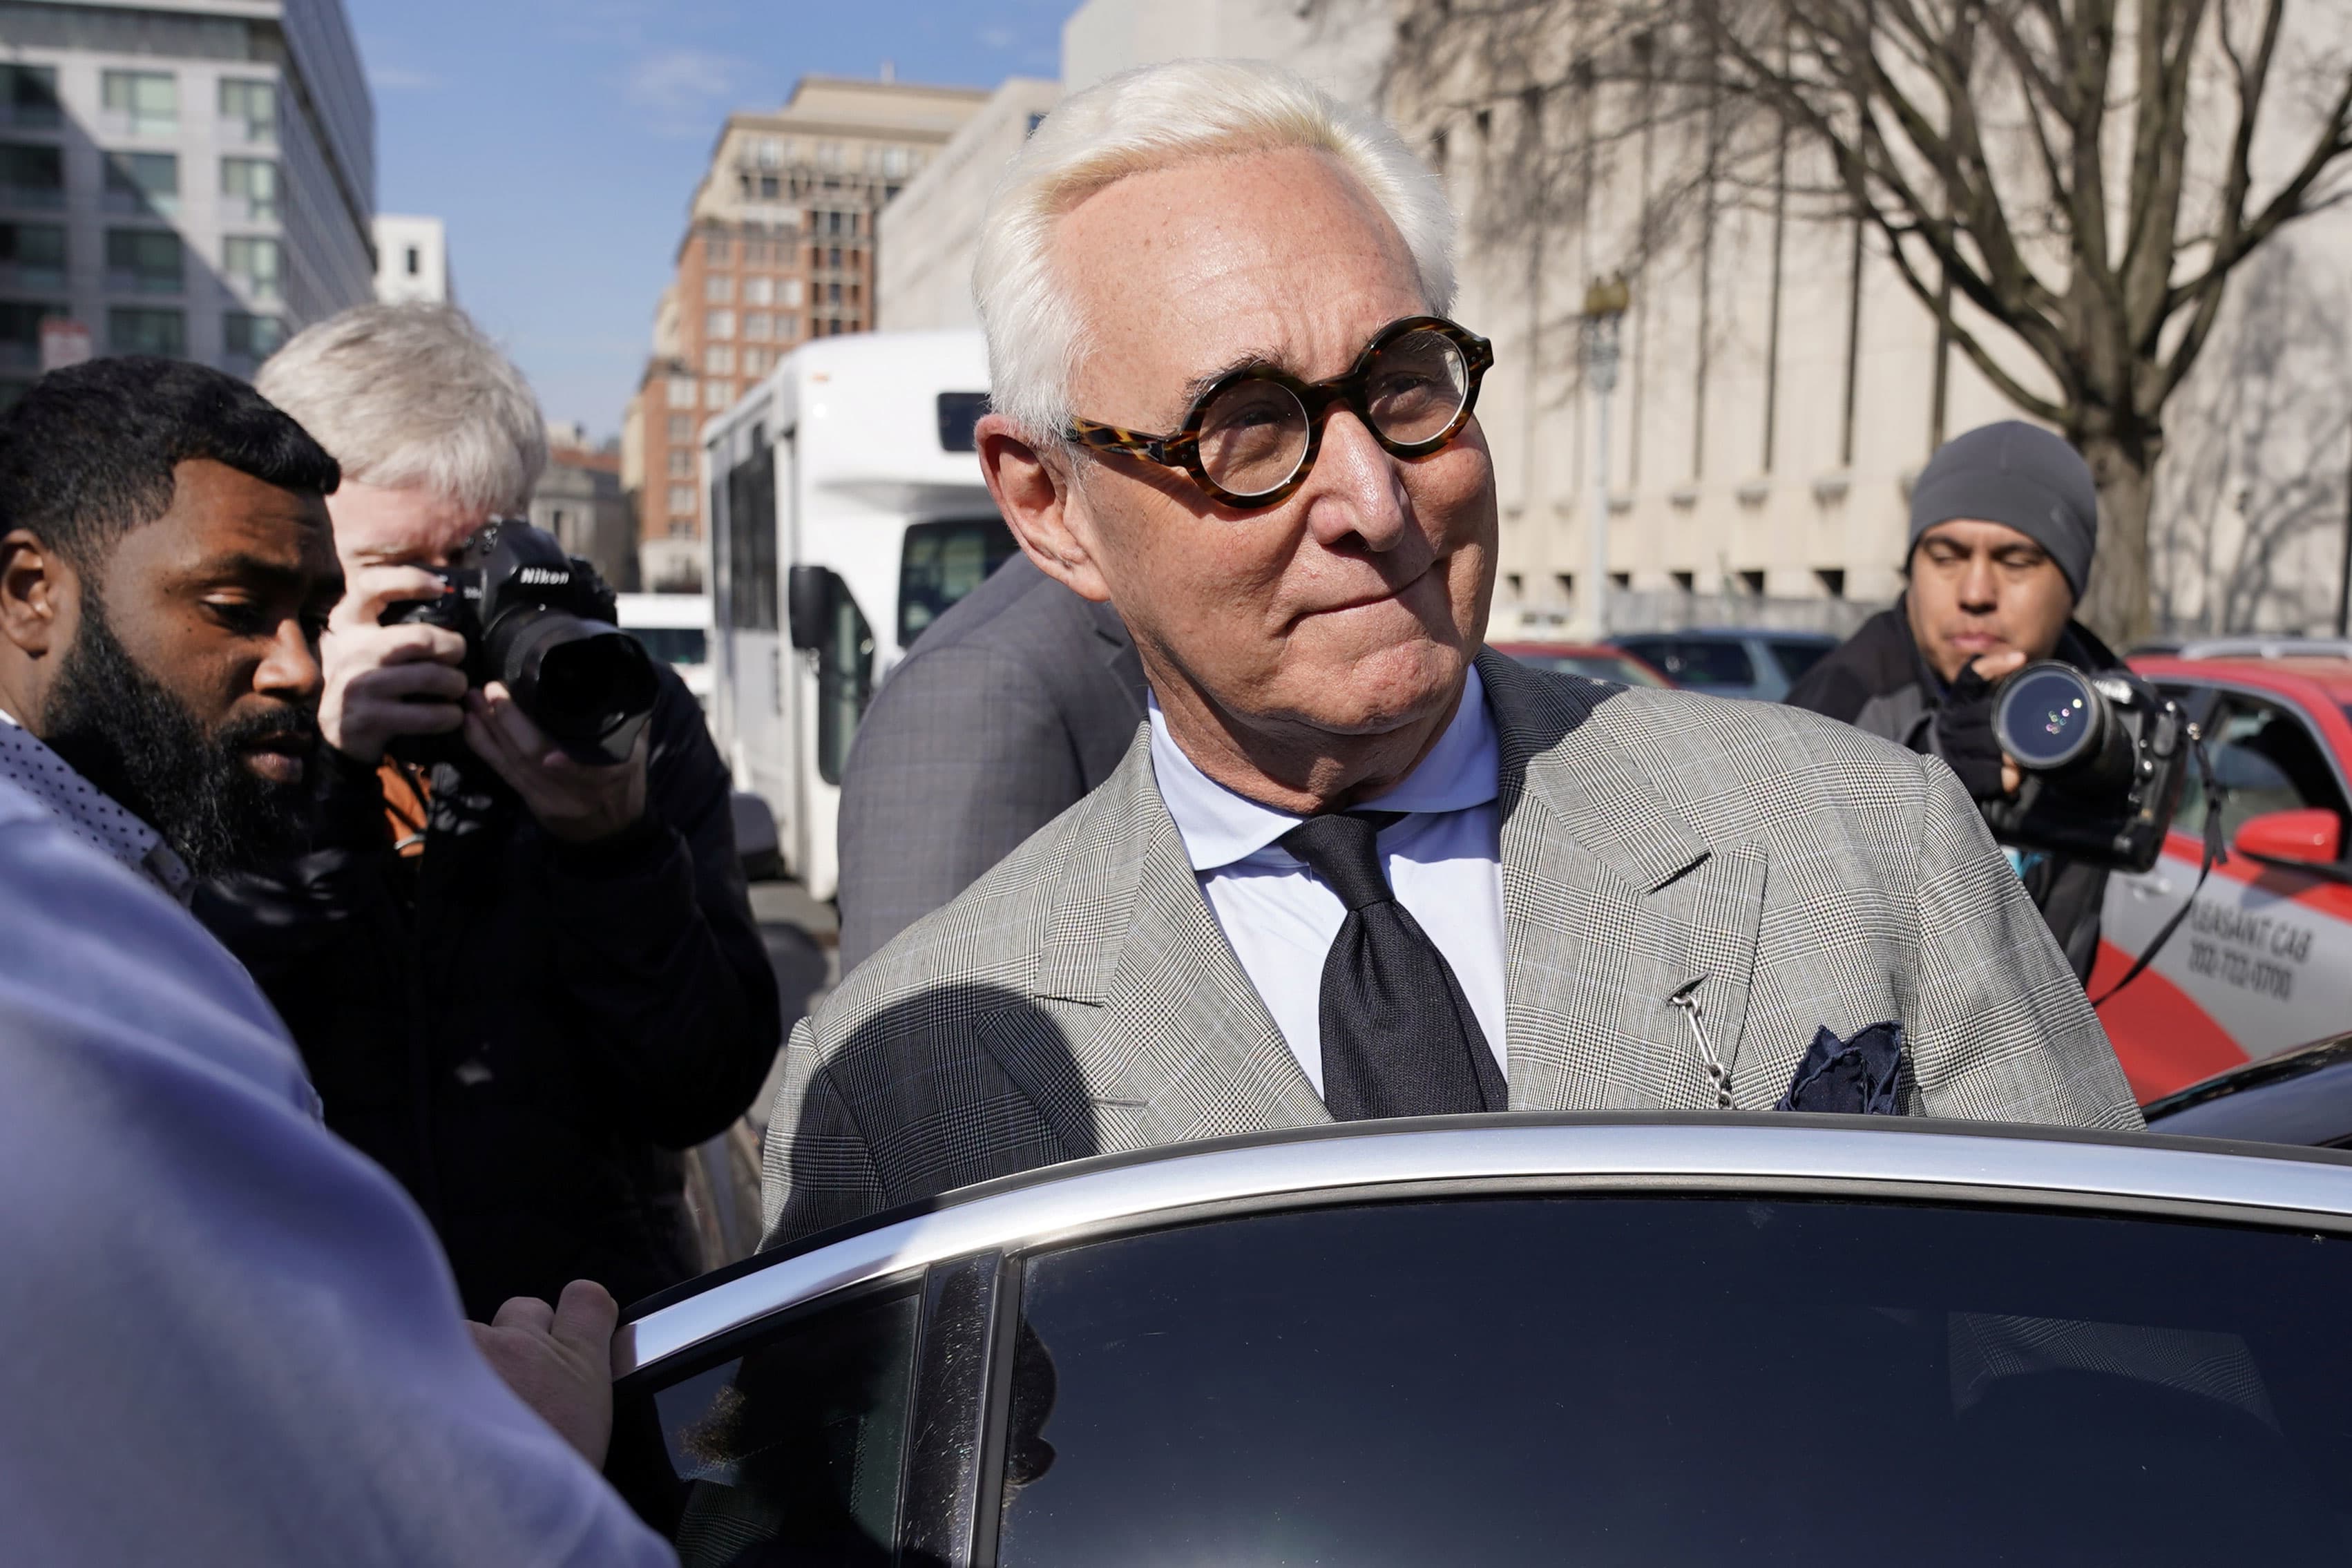 DOJ is suing Trump ally Roger Stone, wife, for alleged unpaid taxes